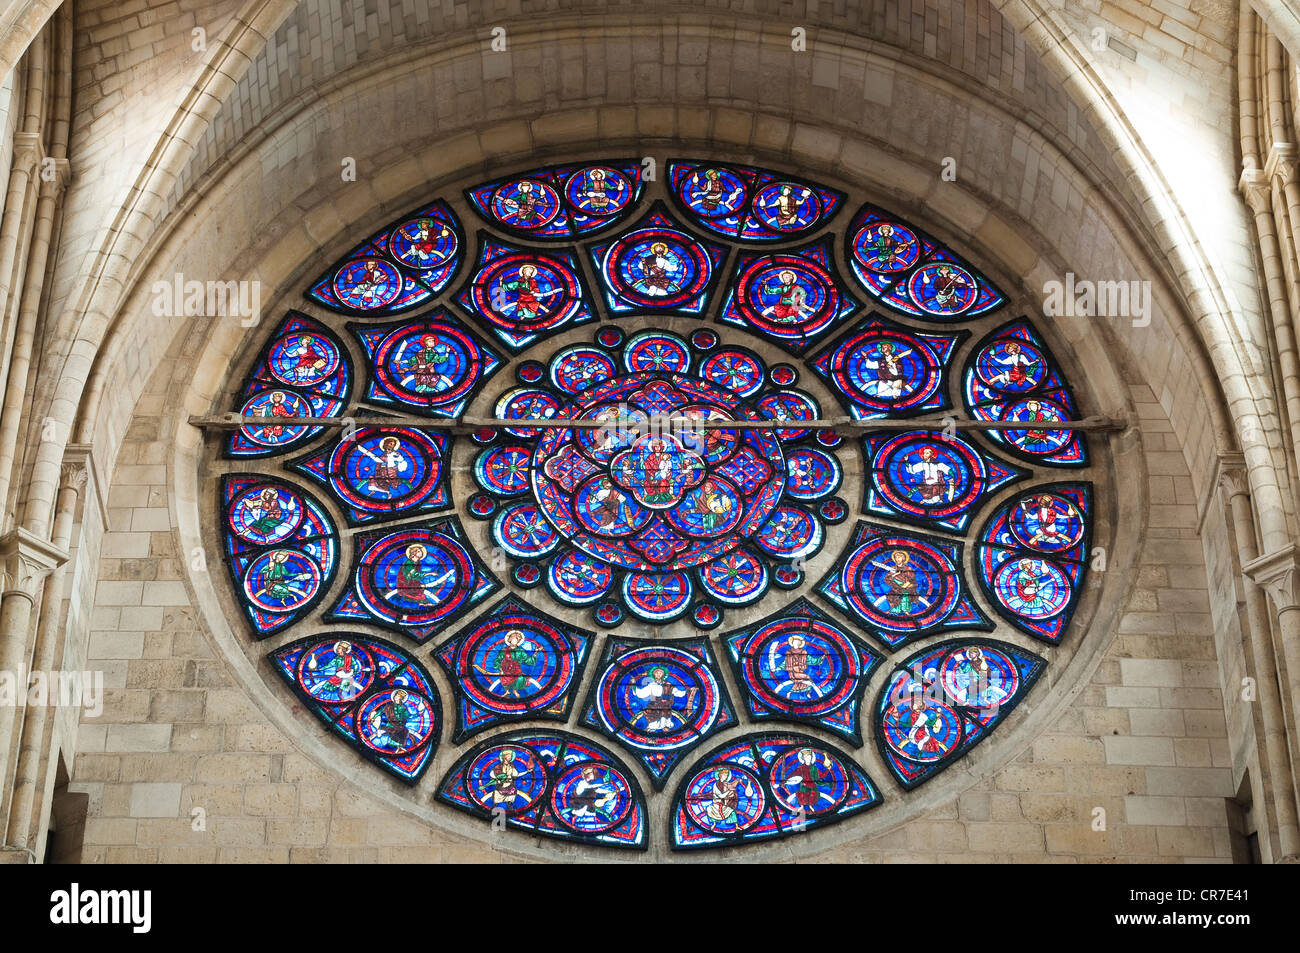 France, Aisne, Laon, Notre Dame cathedral, rose window Stock Photo